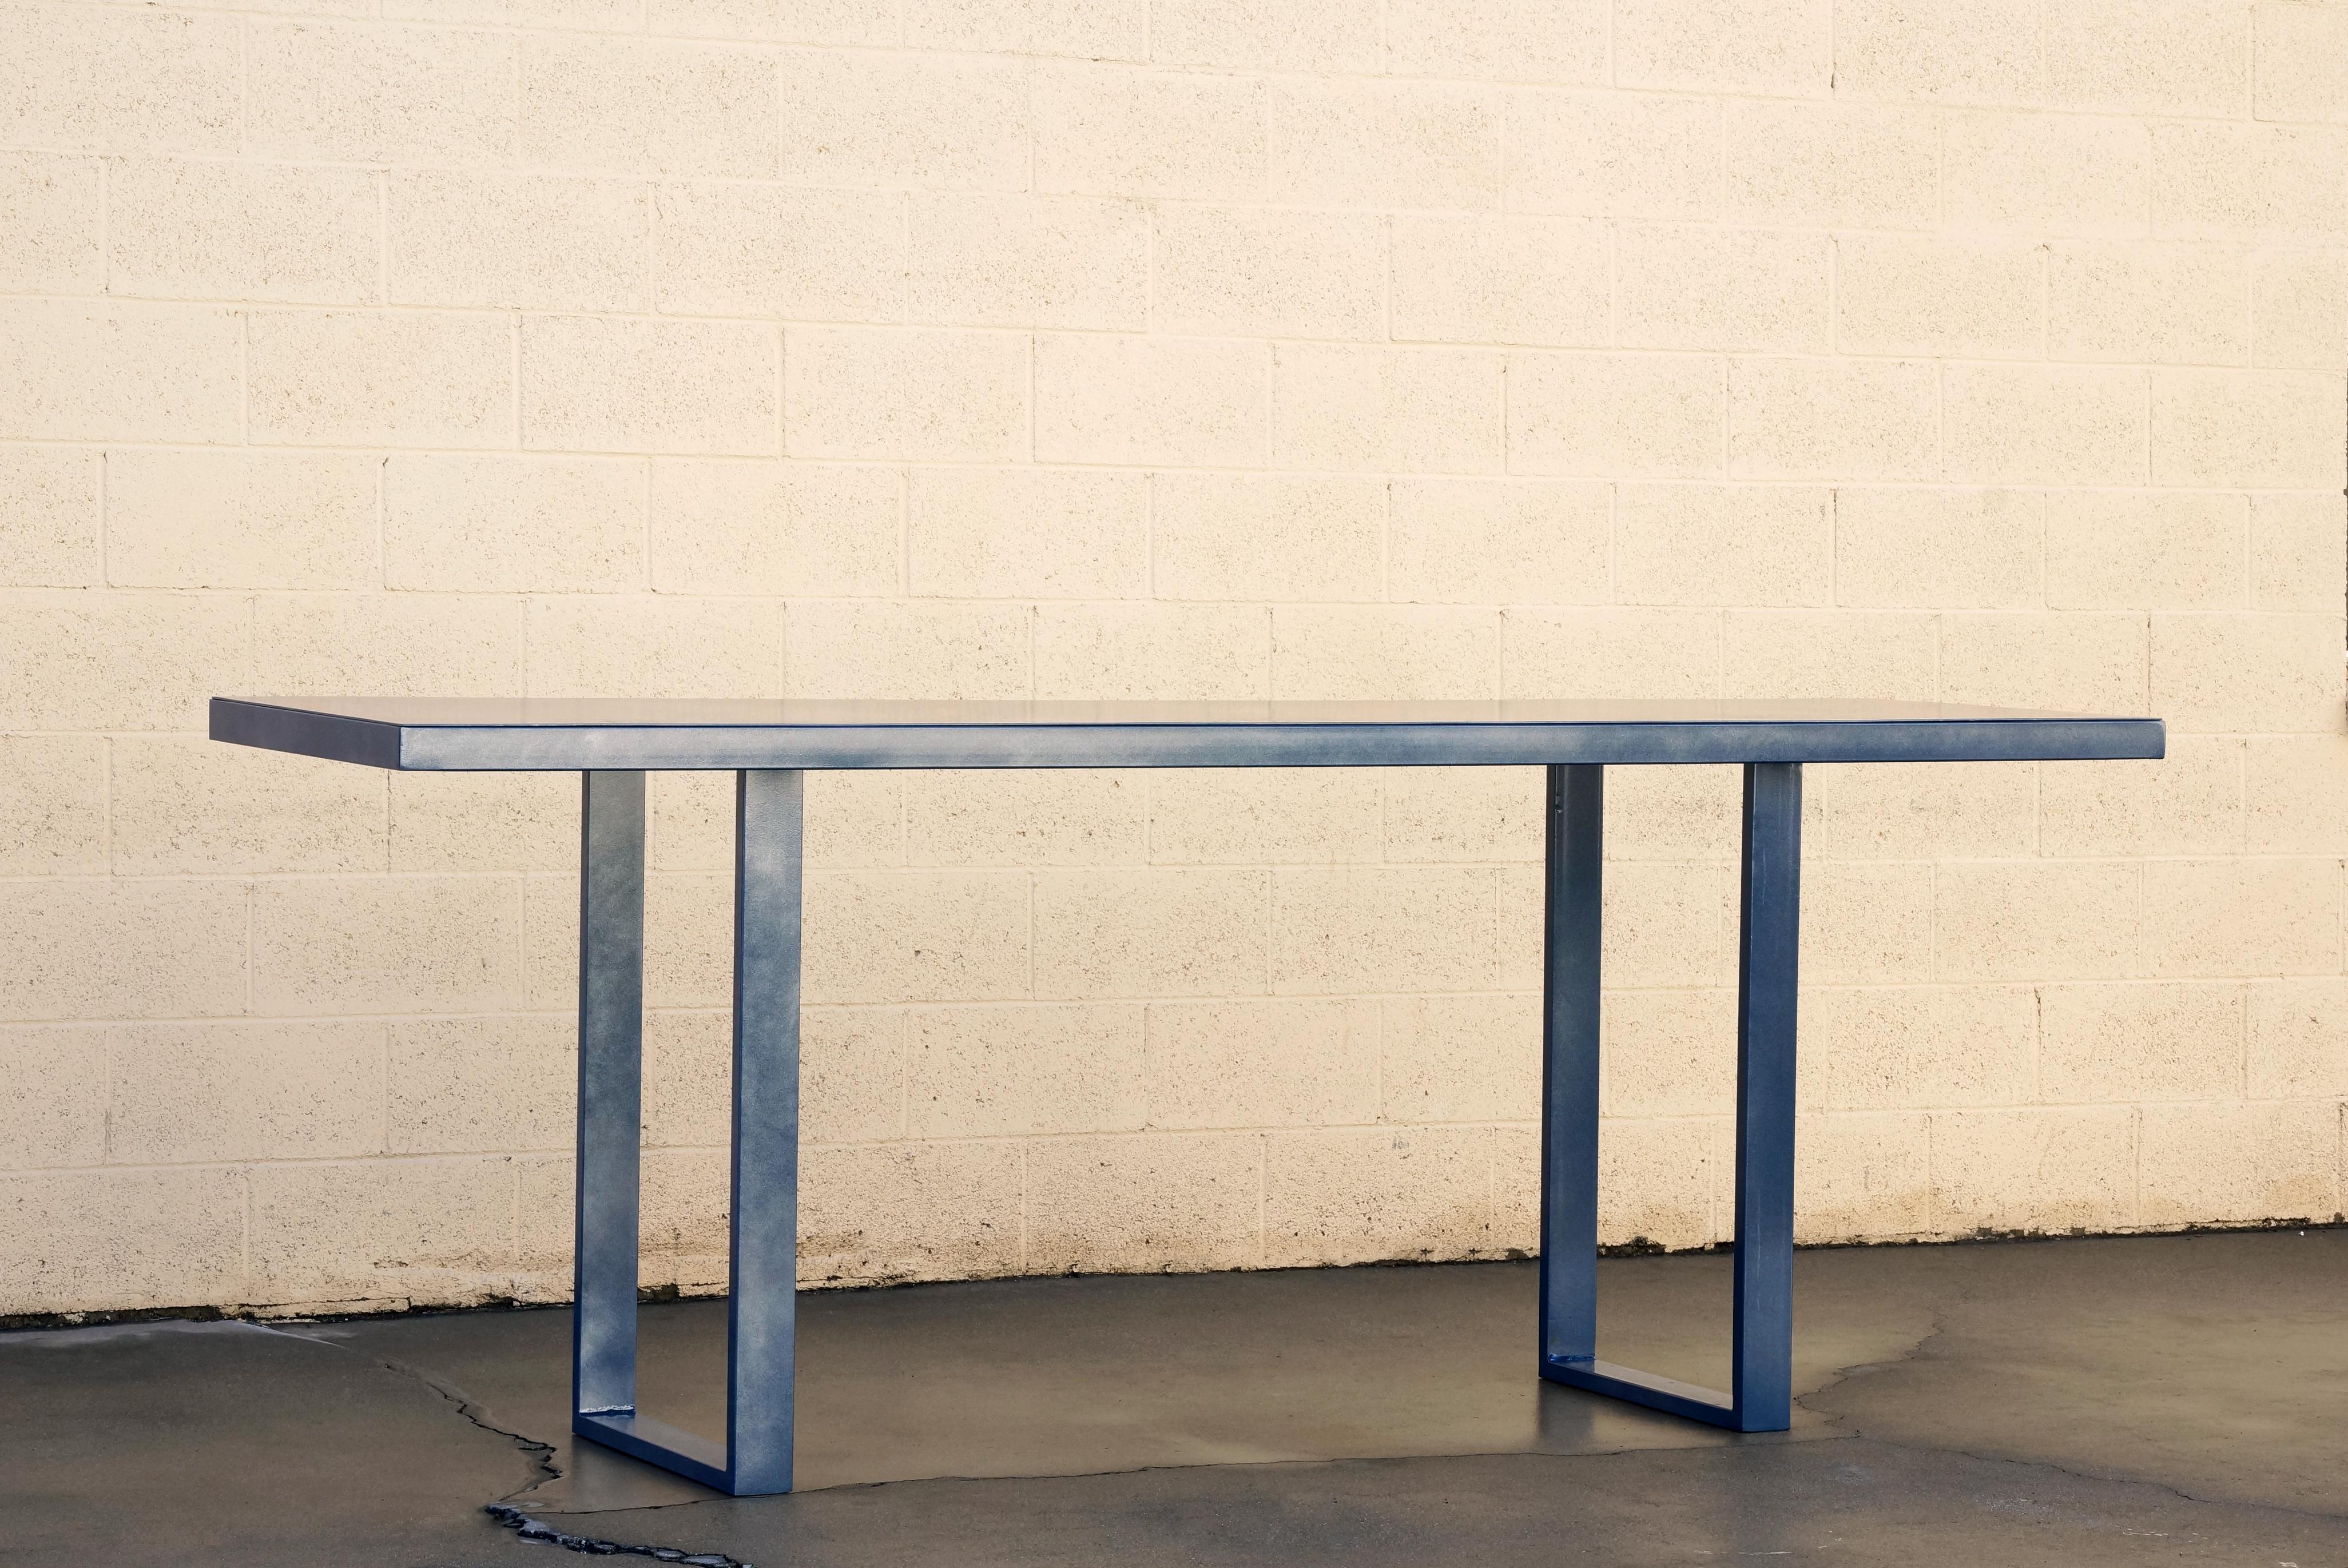 Our custom made Minimalist console/ display table is composed of a rectangular tubing frame with a sheet metal top and powder coated in Metallic Midnight Blue. With it's sleek lines and geometric aesthetic, it's as good looking as it is functional.